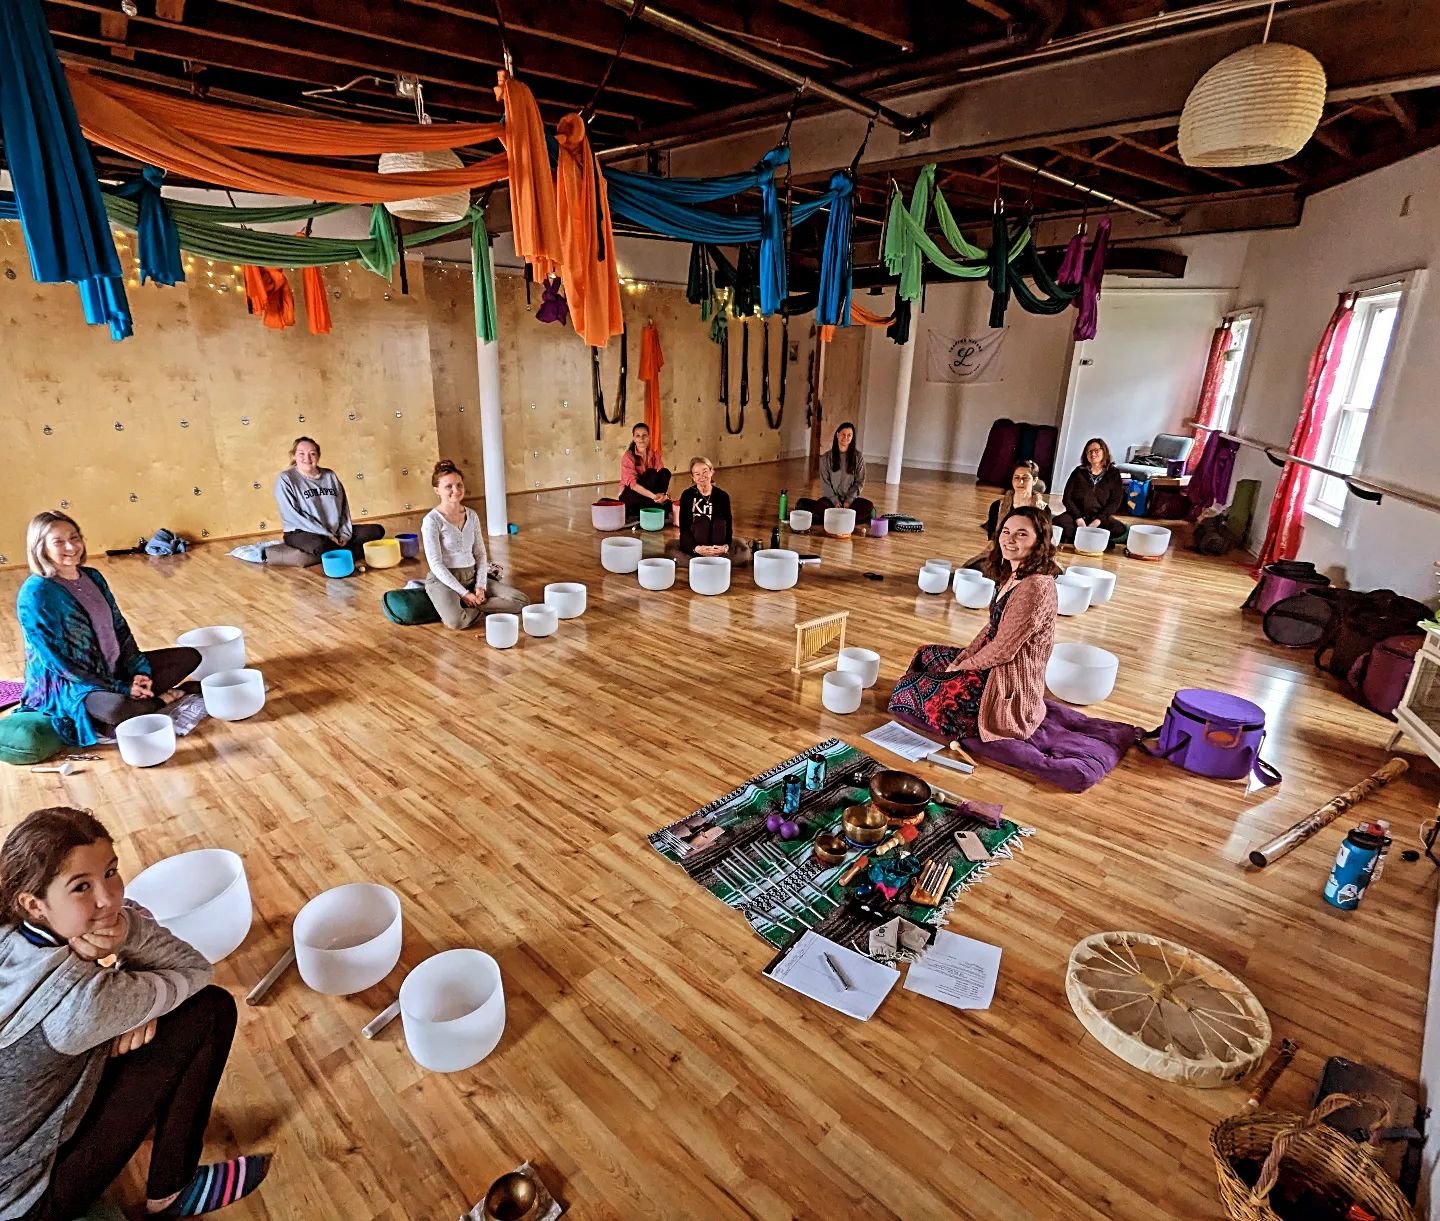 All the singing bowls 🎵💫🎶
Thank you @rachelriverasoundhealer &amp; all who attended to learn!

#soundhealers
#mainesoundhealers
#soundbathstudio